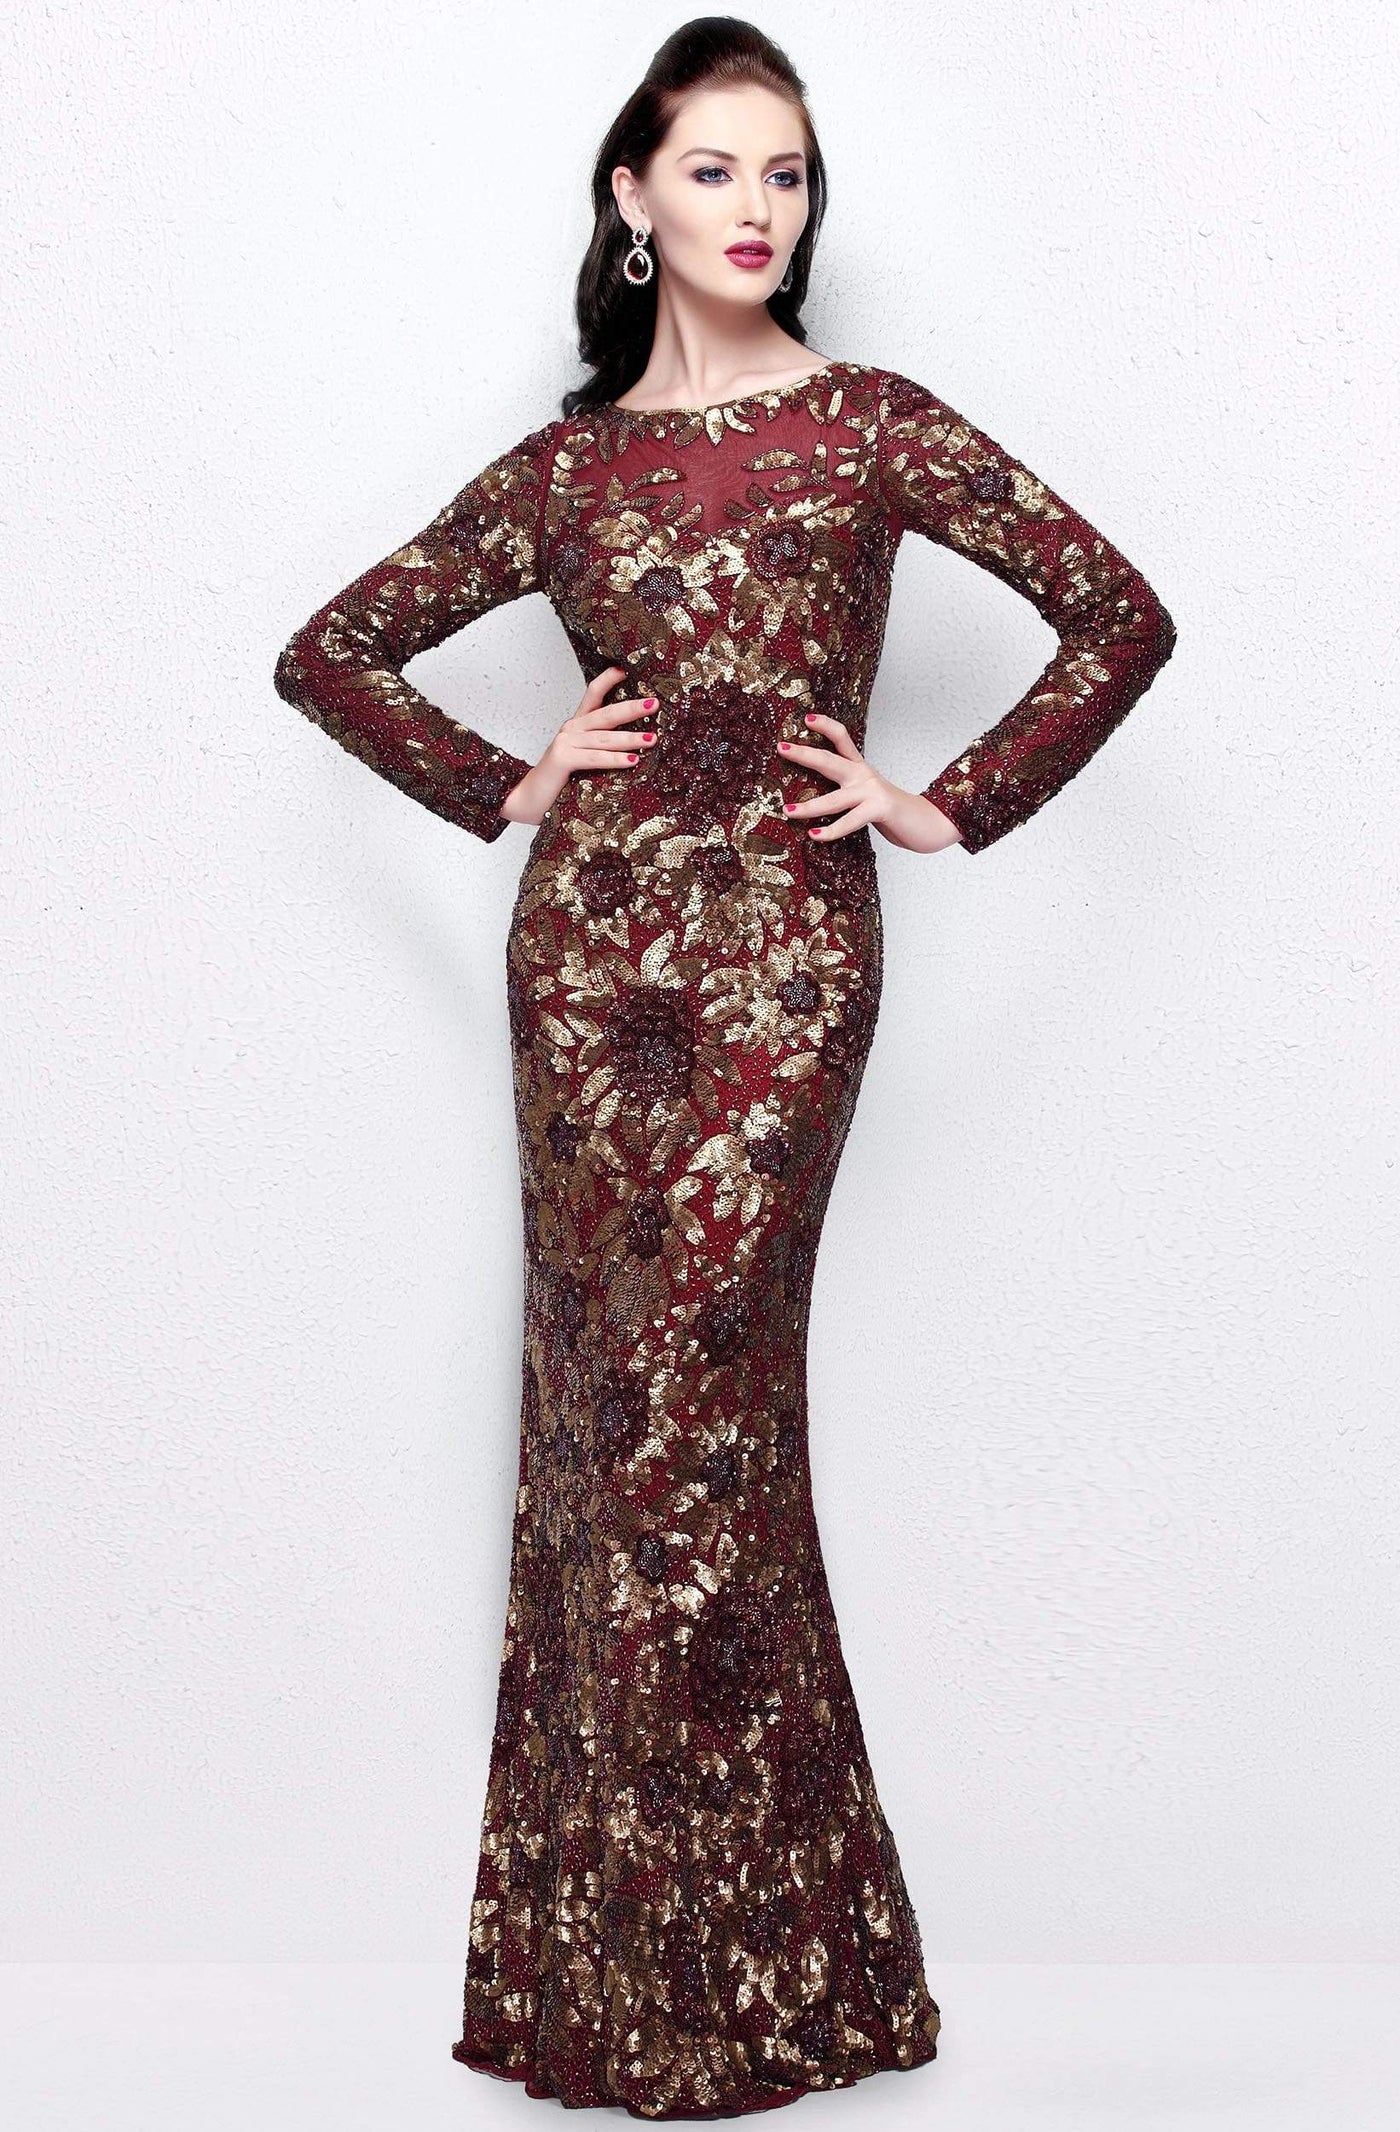 Primavera Couture - Long Sleeve Luxurious Floral Sequined Long Sheath Gown 1401 Mother of the Bride Dresses 0 / Burgundy